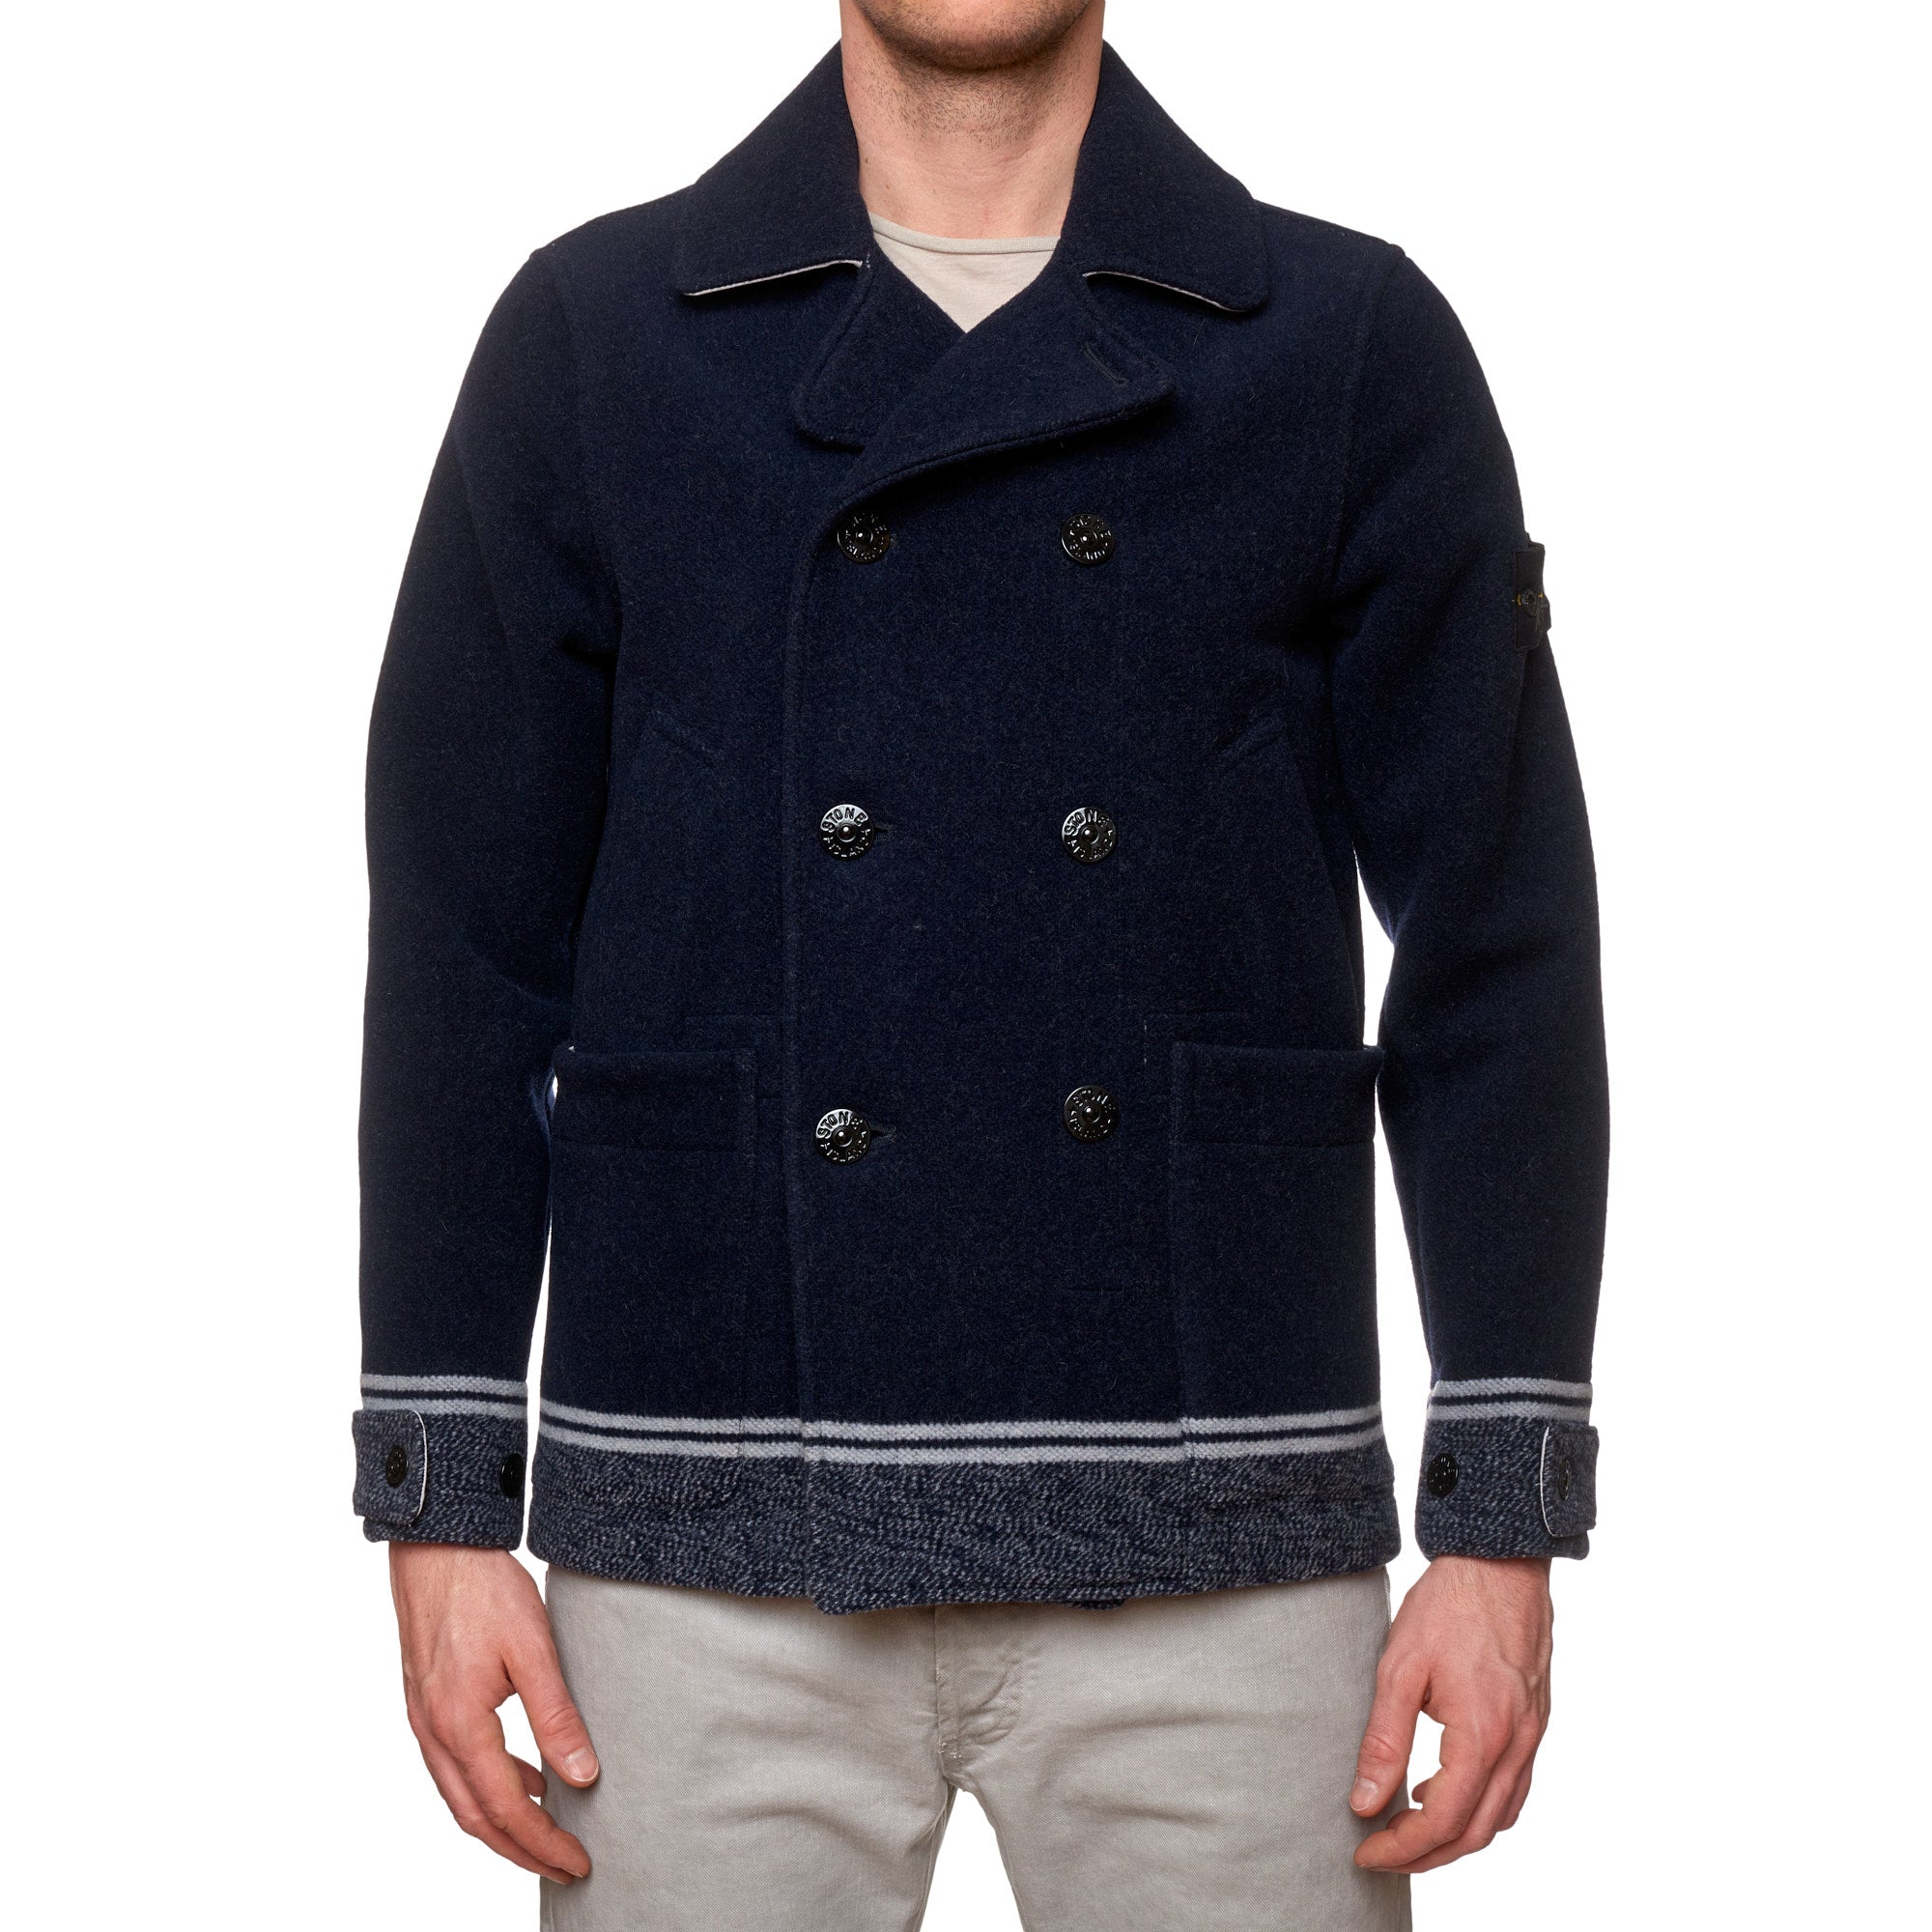 Isaia Leather Utility Jacket in Navy Blue 38R